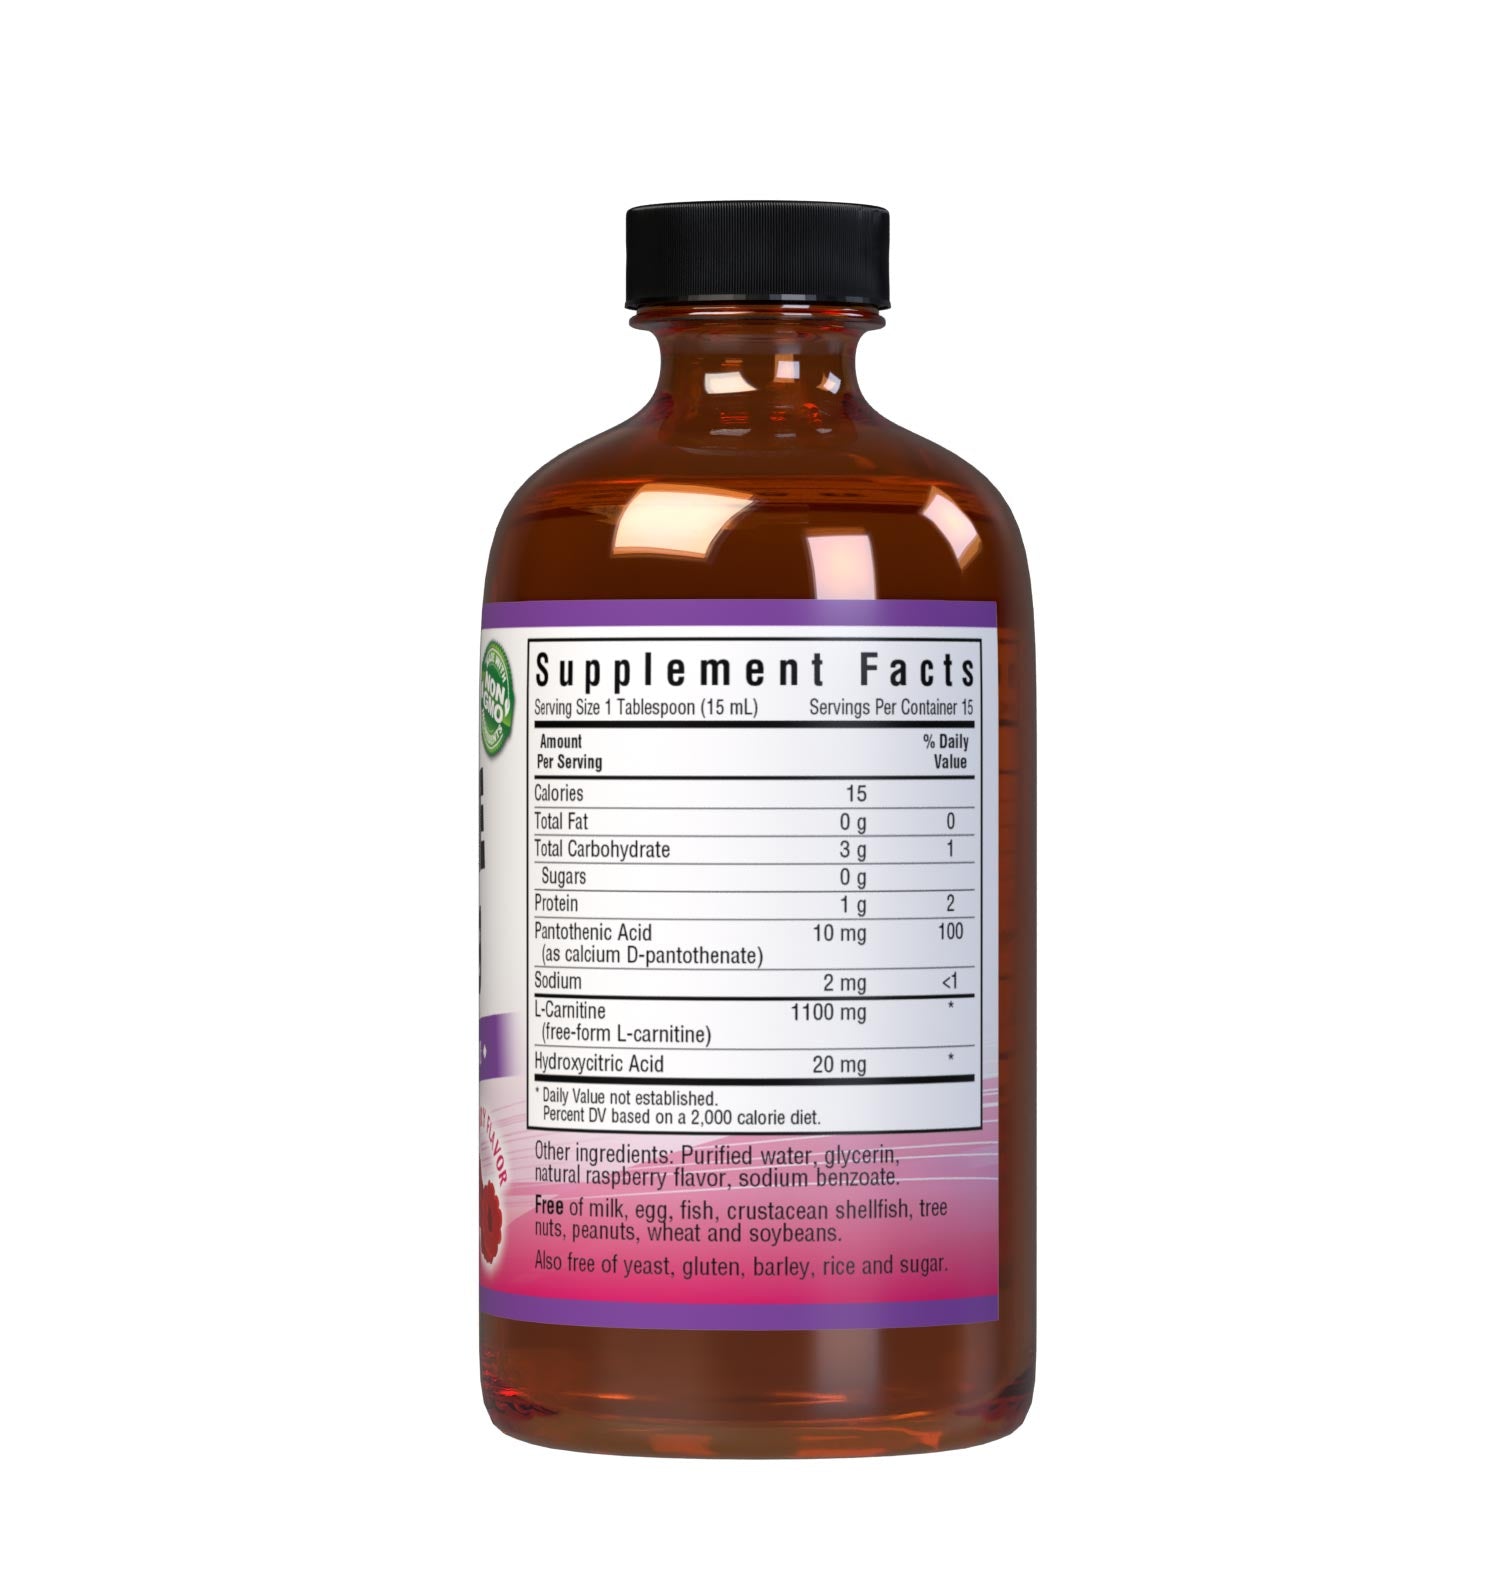 Bluebonnet's Liquid L-Carnitine 1100 mg is formulated with free-form L-carnitine from Lonza along with complementary ingredients, hydroxycitric acid and pantothenic acid to enhance energy production, stamina and endurance for an optimal workout. Supplement facts panel. #size_8 fl oz